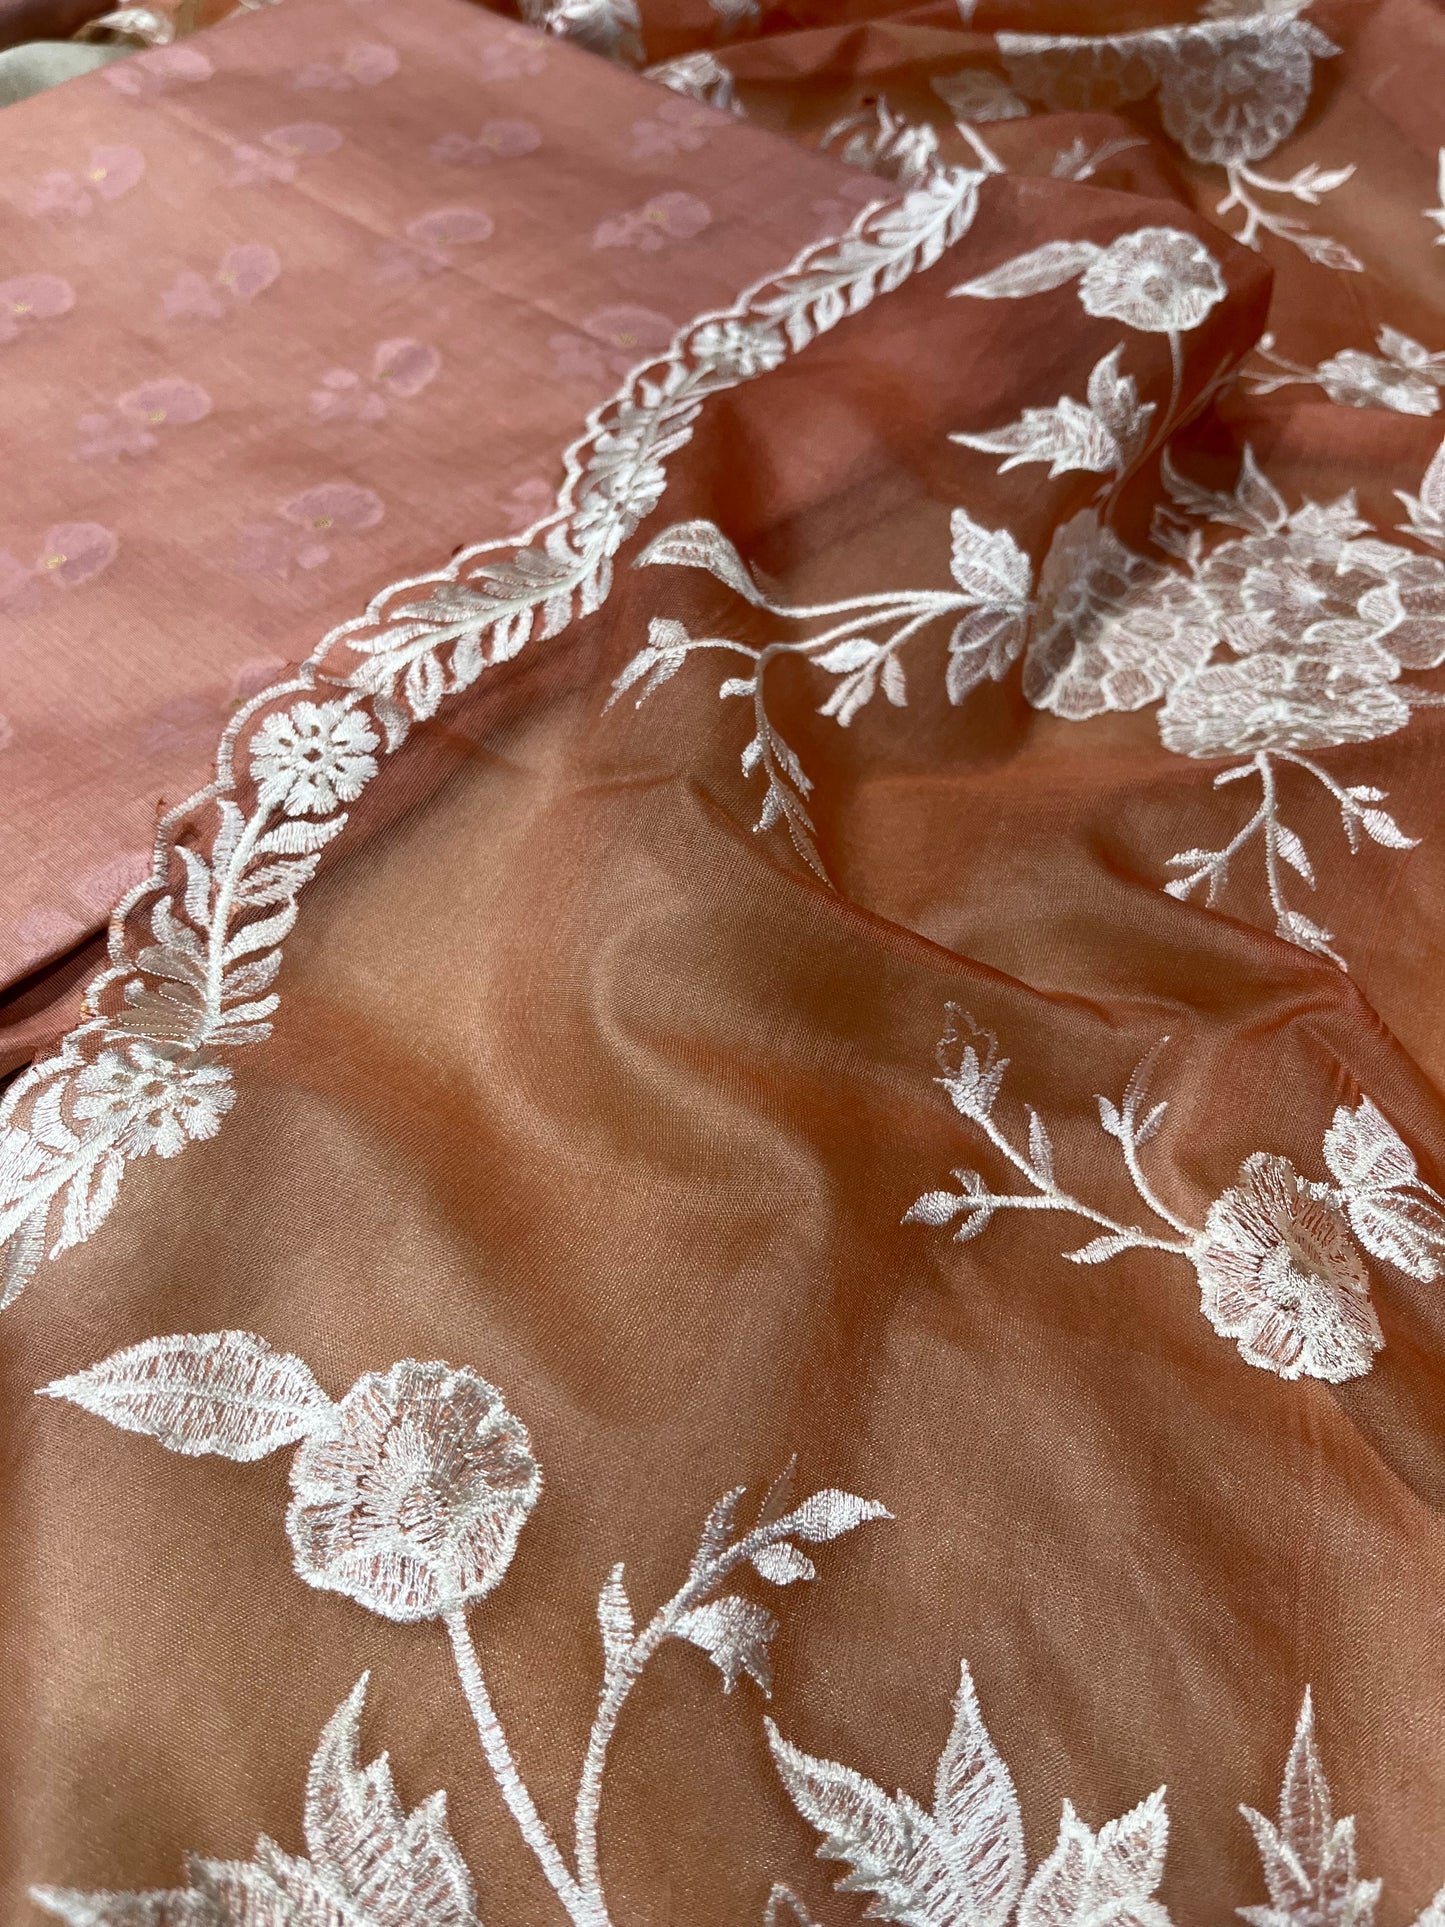 PEACH BLUSH COLOUR CHANDERI SILK UNSTITCHED SUIT WITH ORGANZA EMBROIDERED DUPATTA EMBELLISHED WITH RESHAM EMBROIDERY